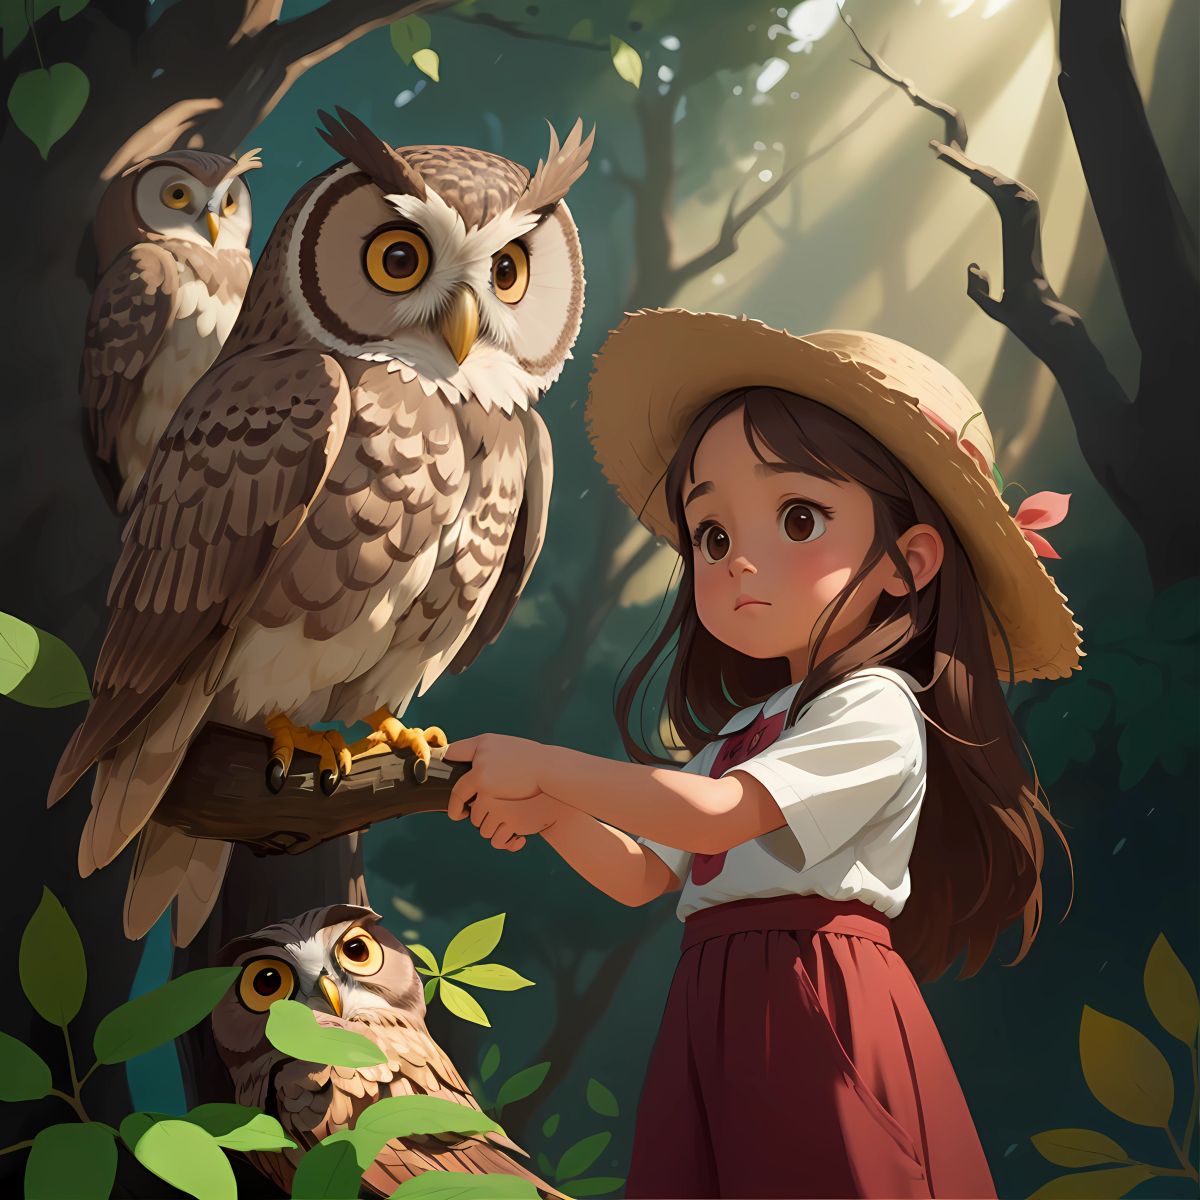 Making New Friends: Julia encountering a wise old owl perched on a branch.